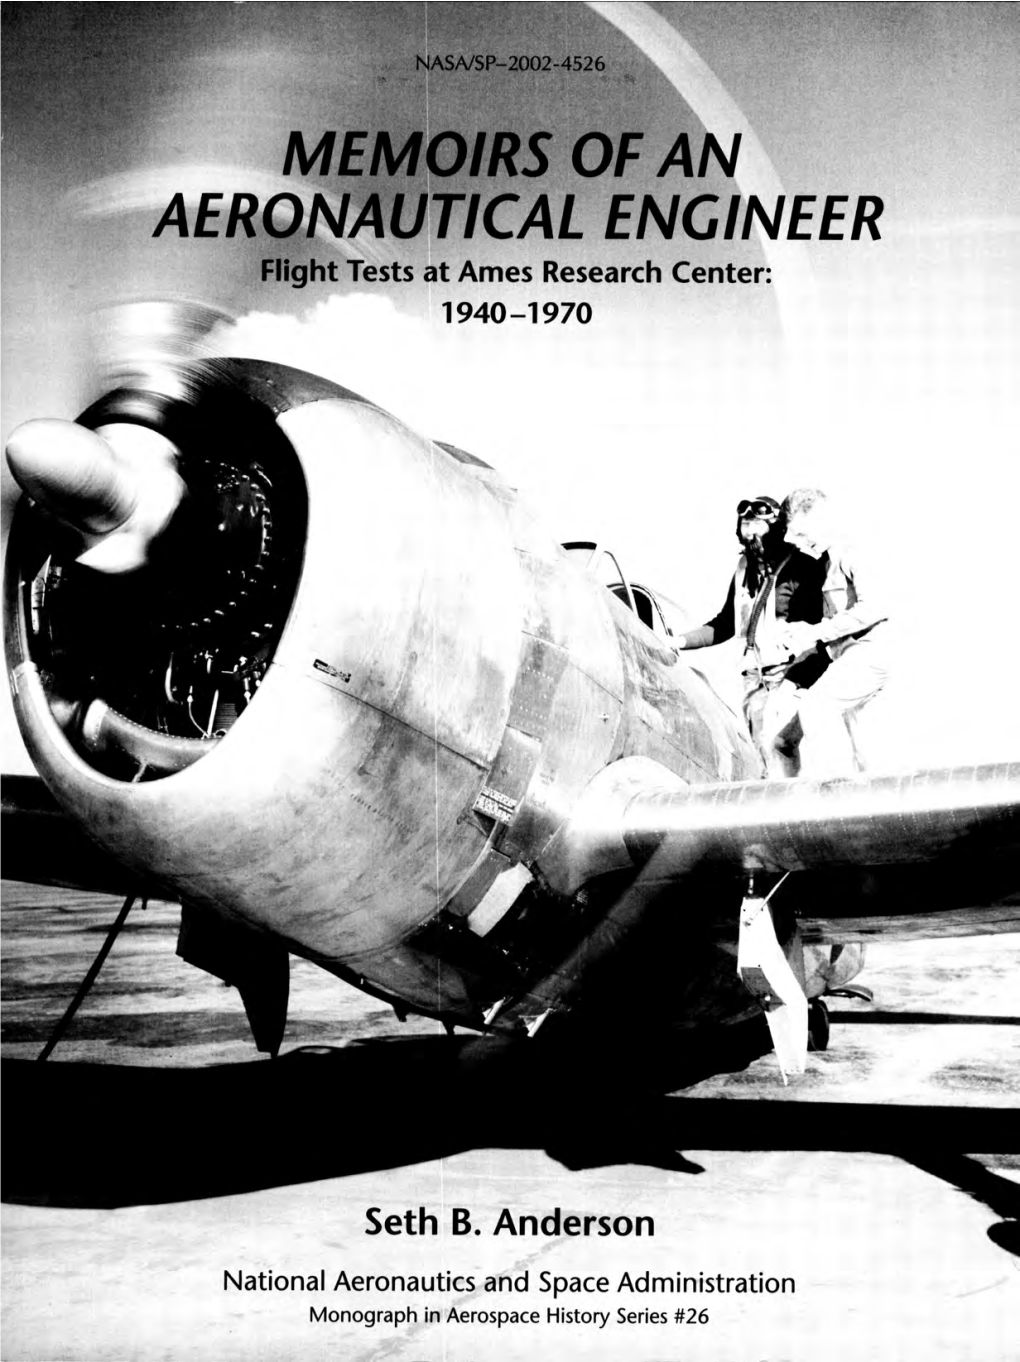 Memoirs of an Aeronautical Engineer : Flight Testing at Ames Research Center, 1940-1 970 I by Seth B